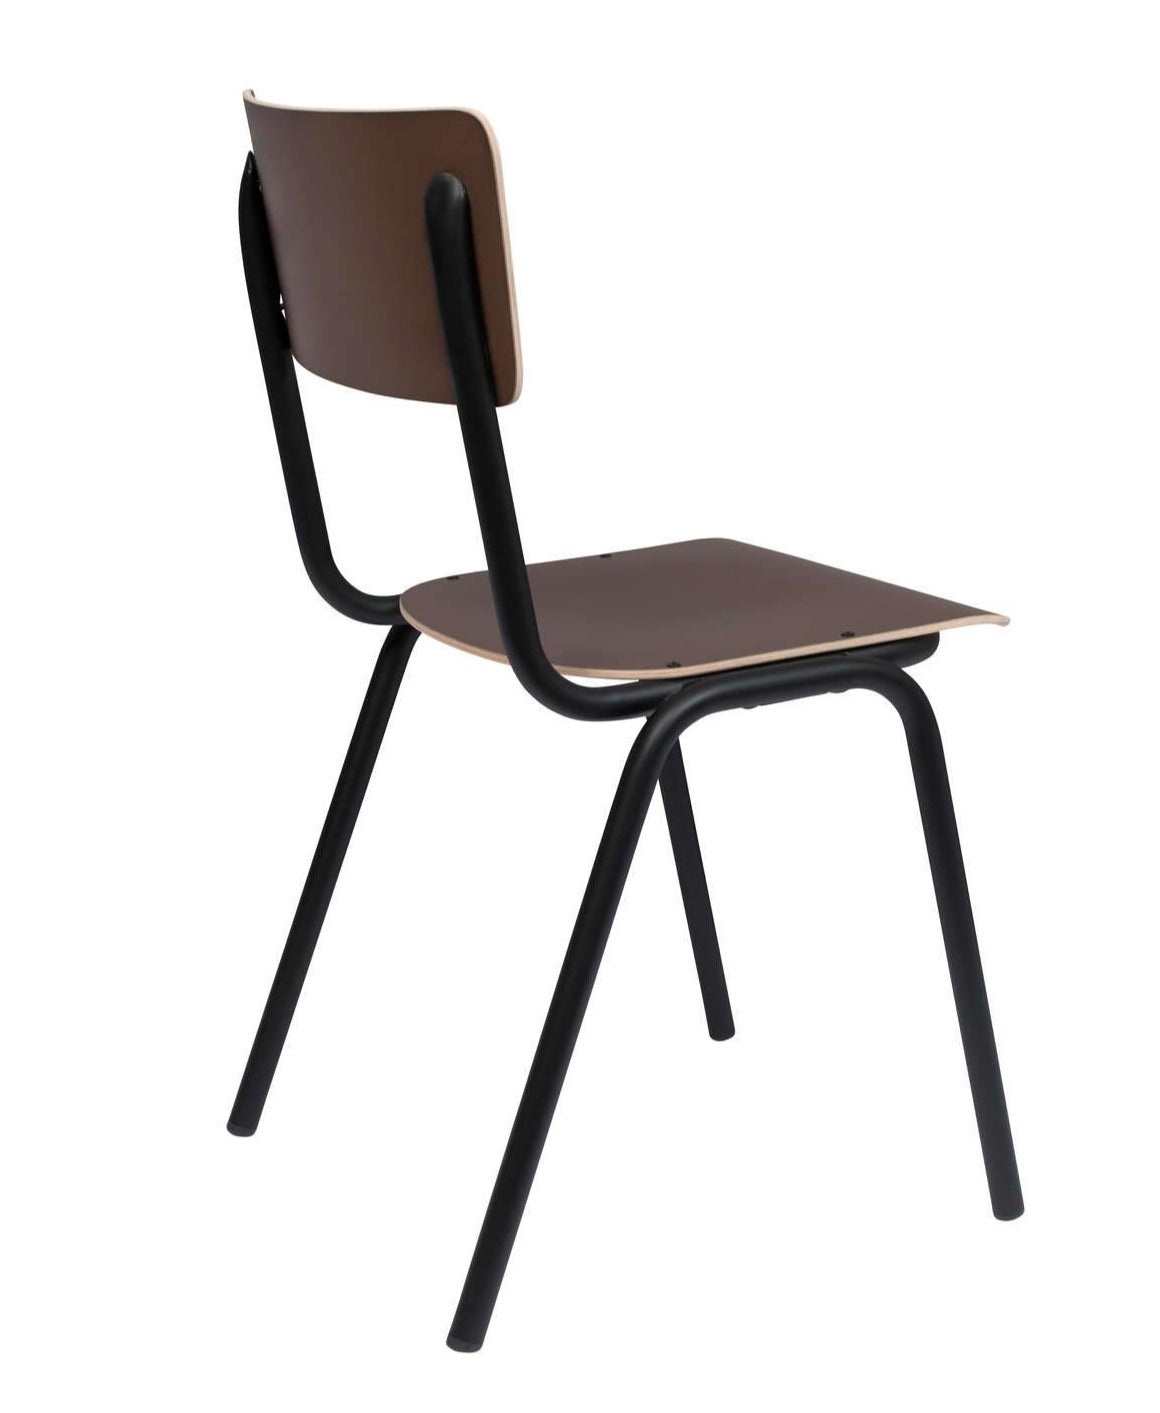 BACK TO SCHOOL chair brown, Zuiver, Eye on Design